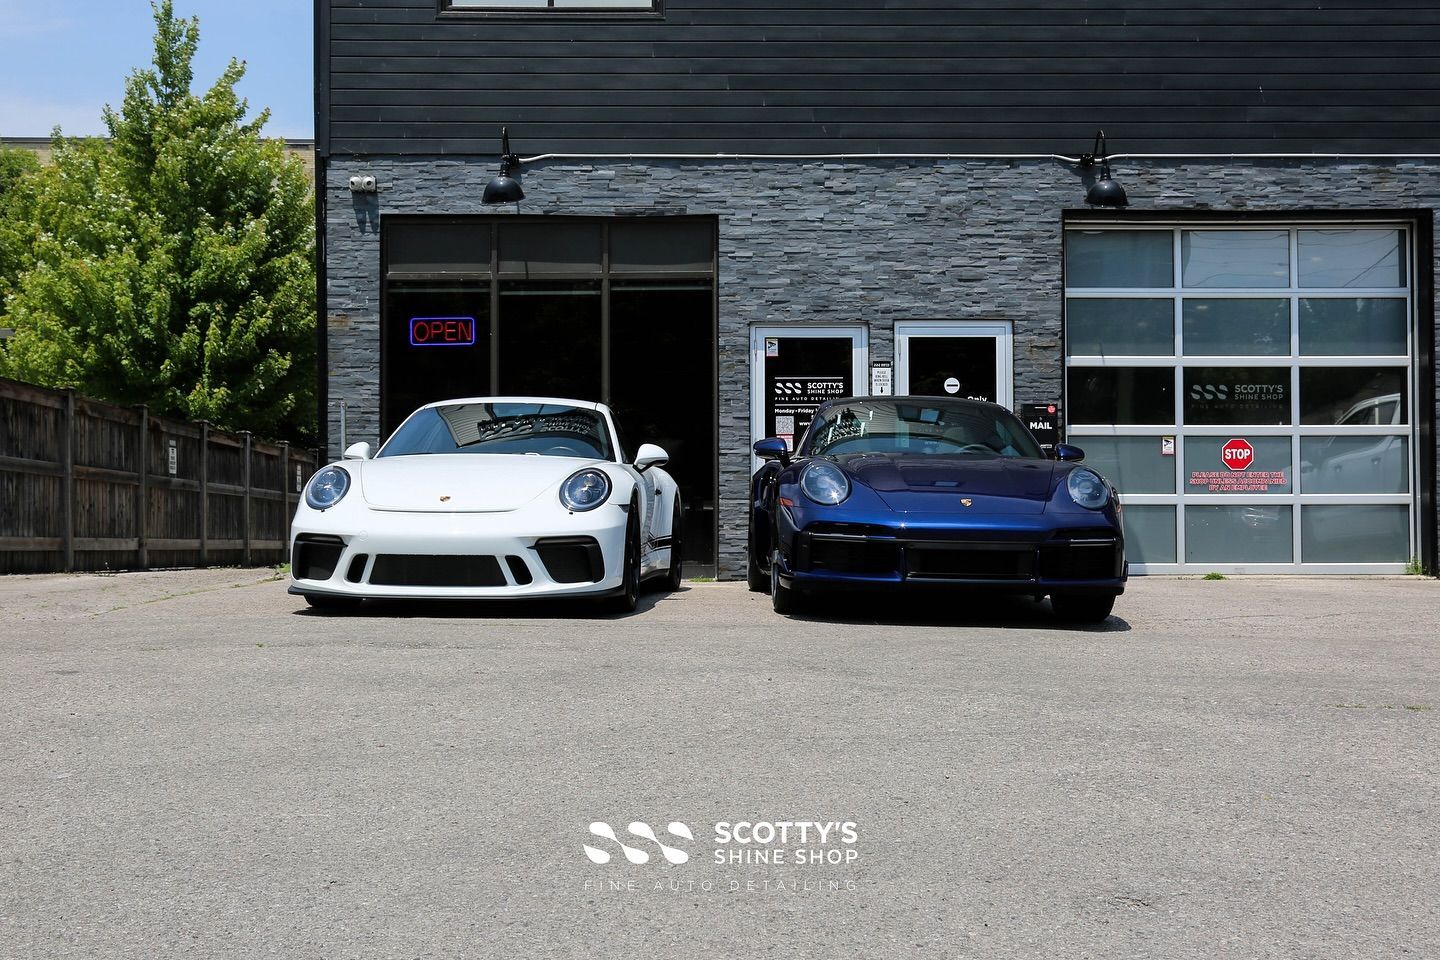 2 Porsche are better than 1! Both of these beautiful Germans received coverage in our premium Suntek